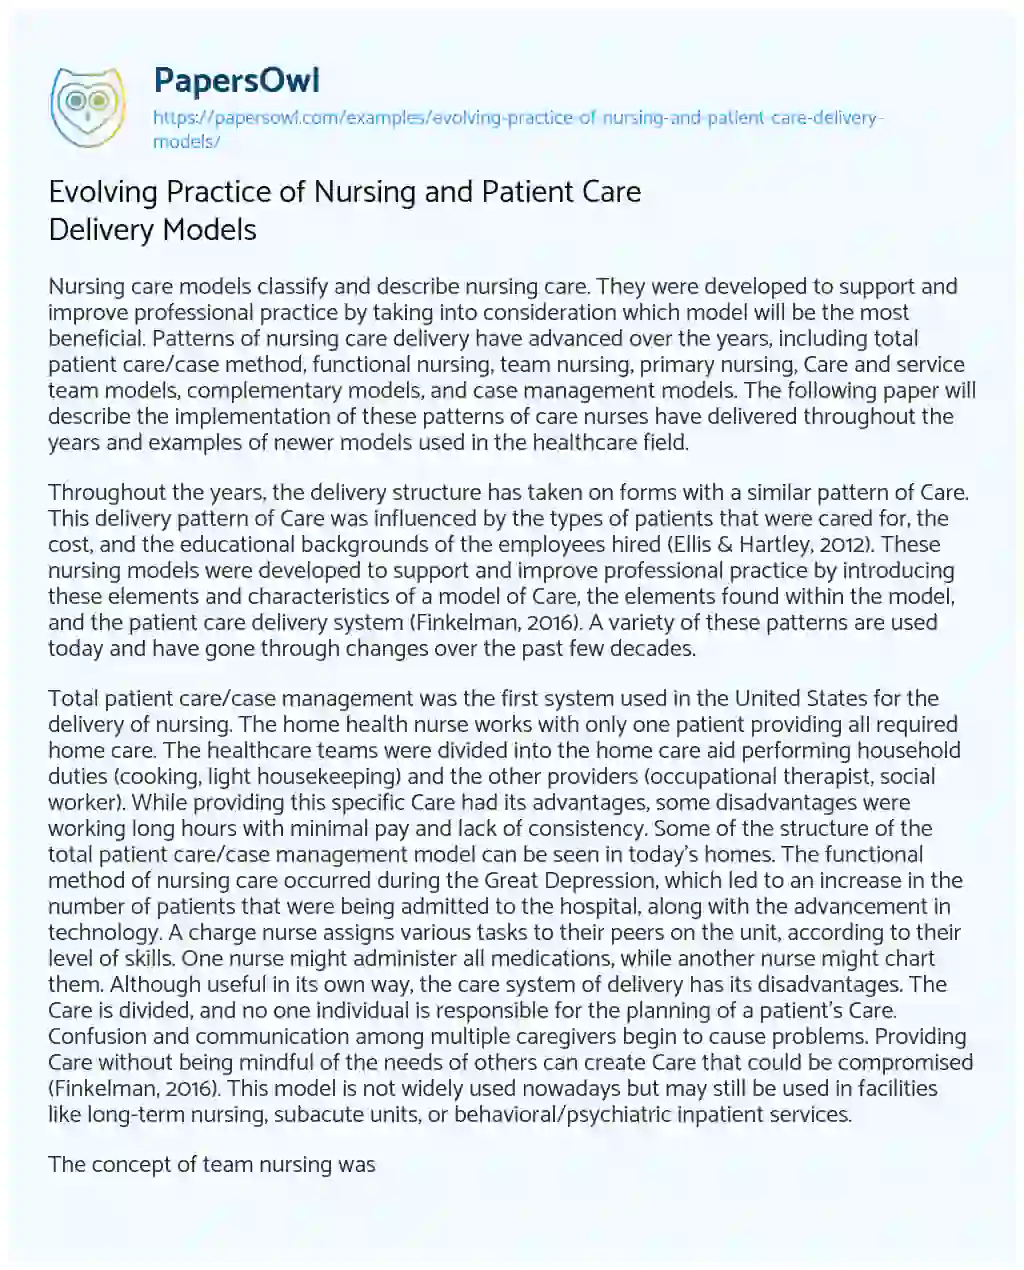 Essay on Evolving Practice of Nursing and Patient Care Delivery Models